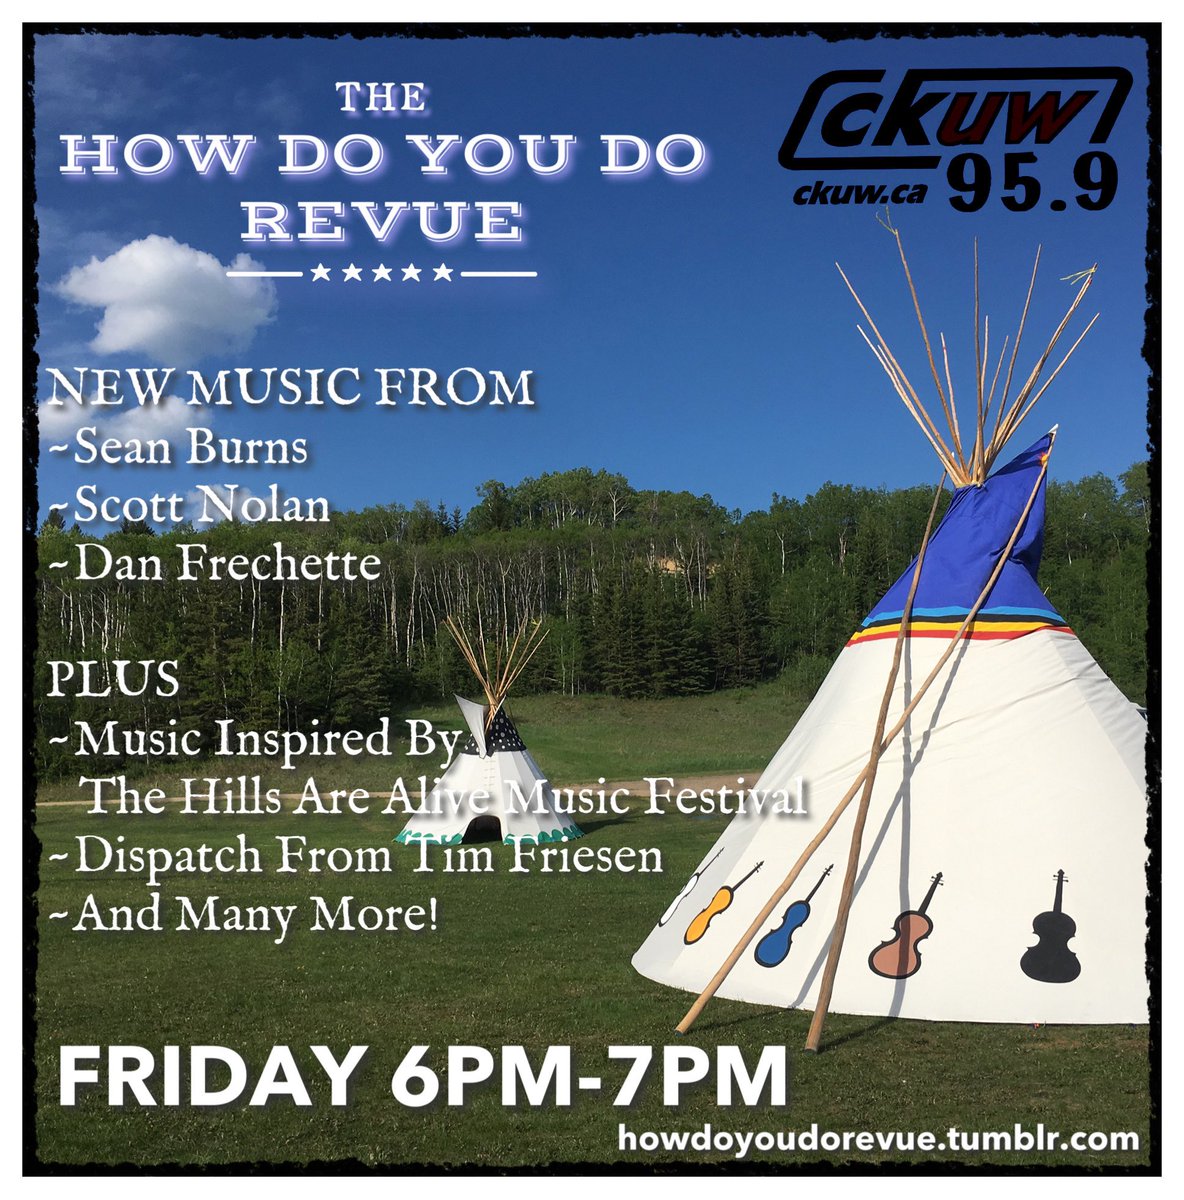 Chock-full program of music today on @ckuw!

New music from @seanburns83, @ScottNolan5, @frechettesongs...

Also, an inspired set from The Hills Are Alive Music Festival in Alberta that should be happening right now. JJ Guy, @DanielgGervais, @PattiKusturok and more!